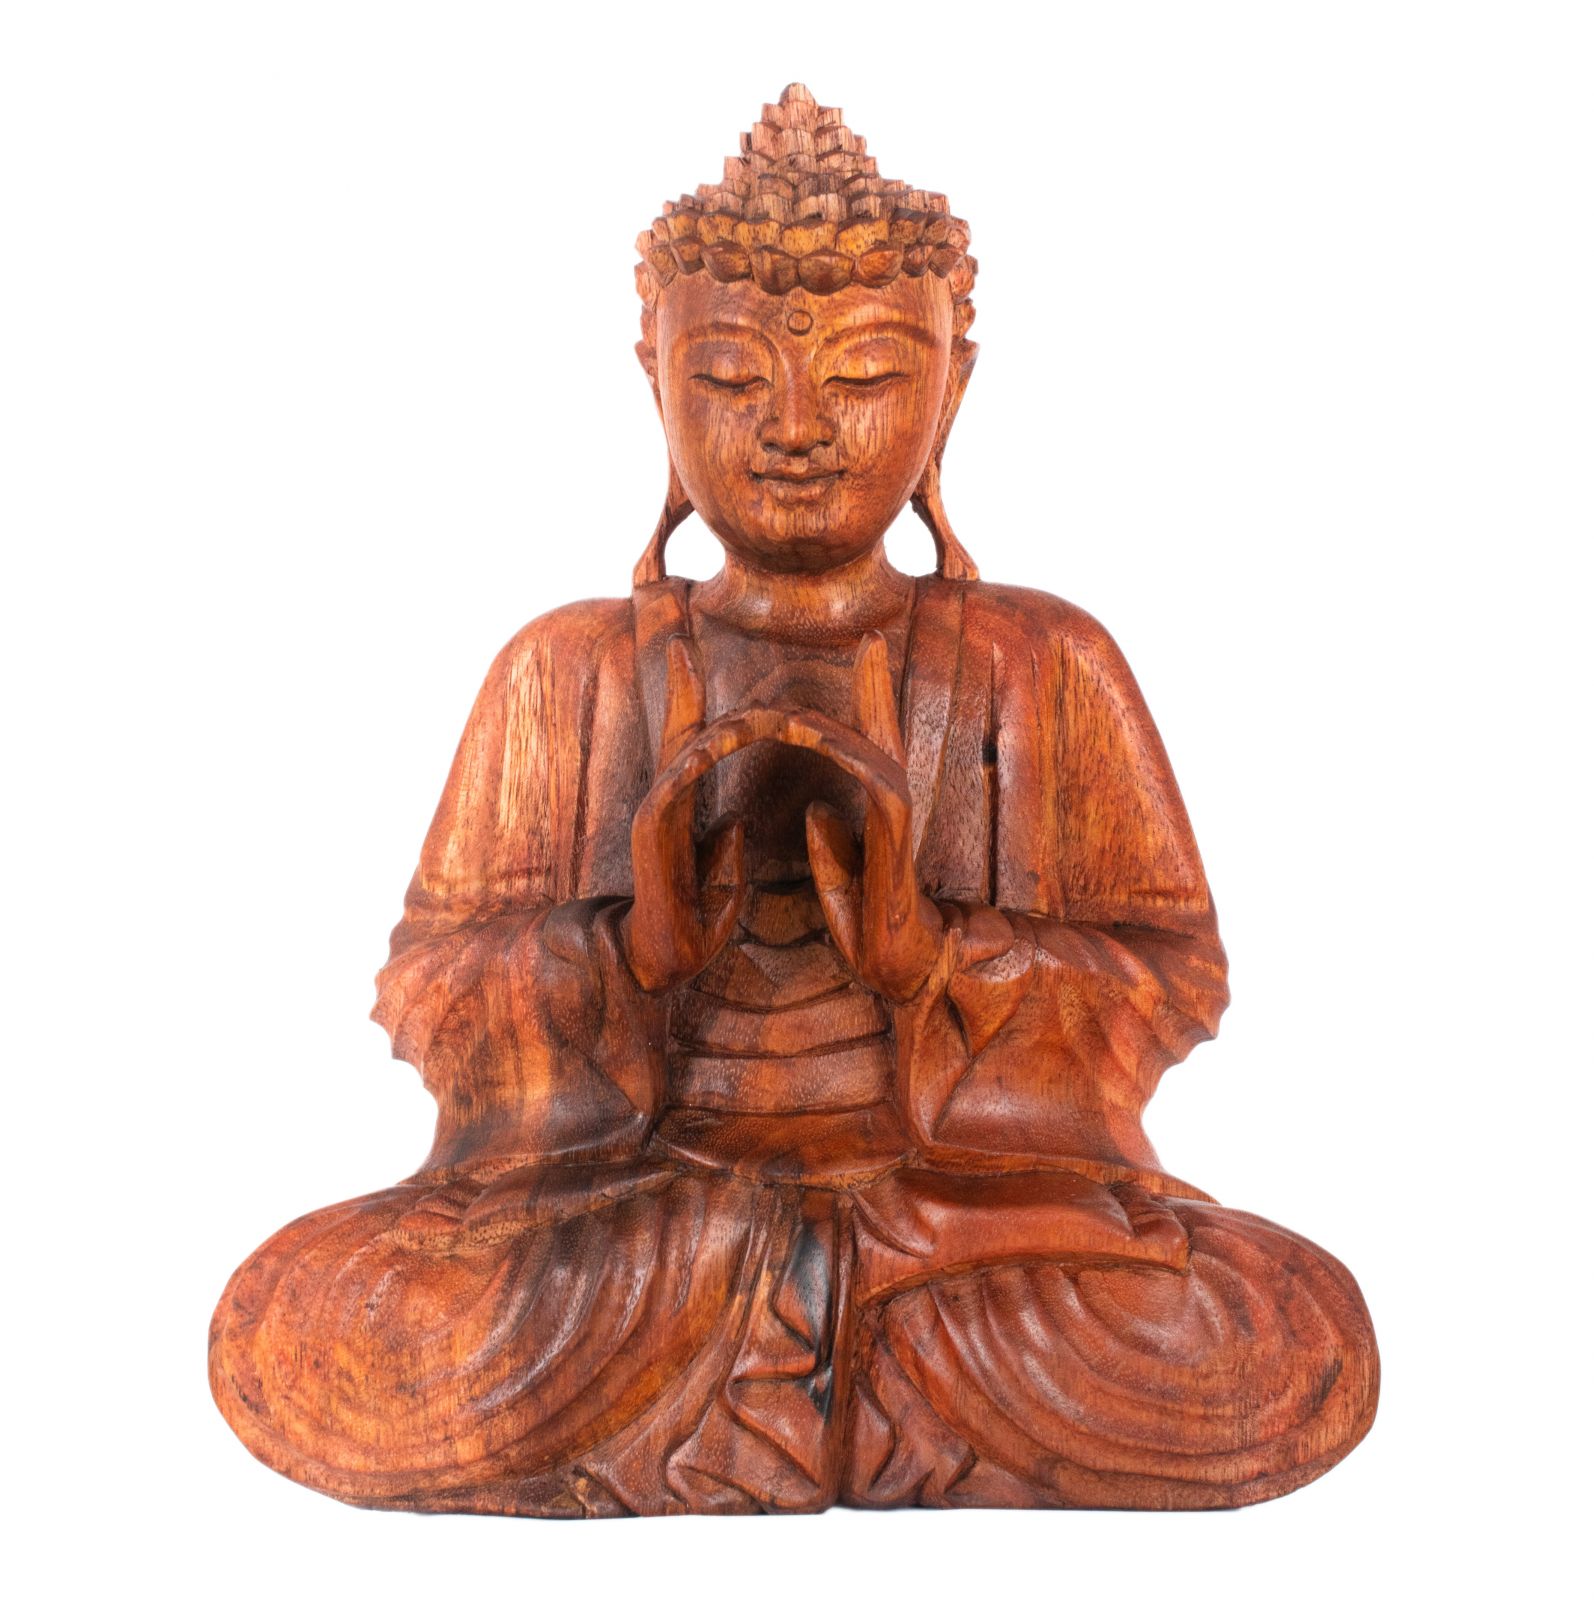 Carved wooden statue of Sitting Buddha 1 Indonesia